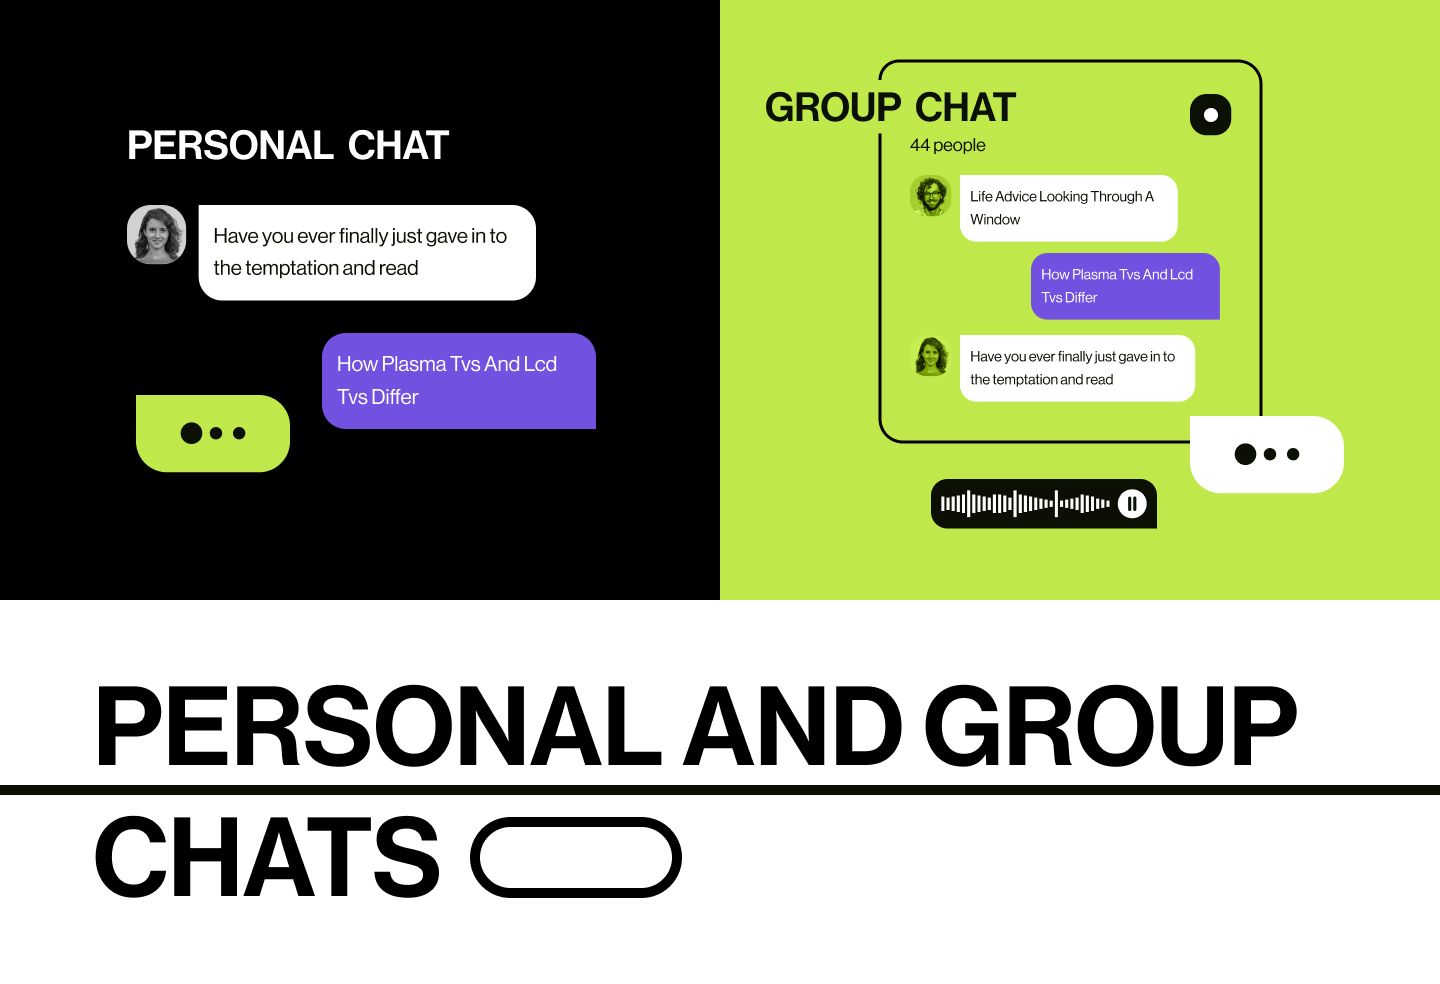 Personal and group chats in a secure messaging app